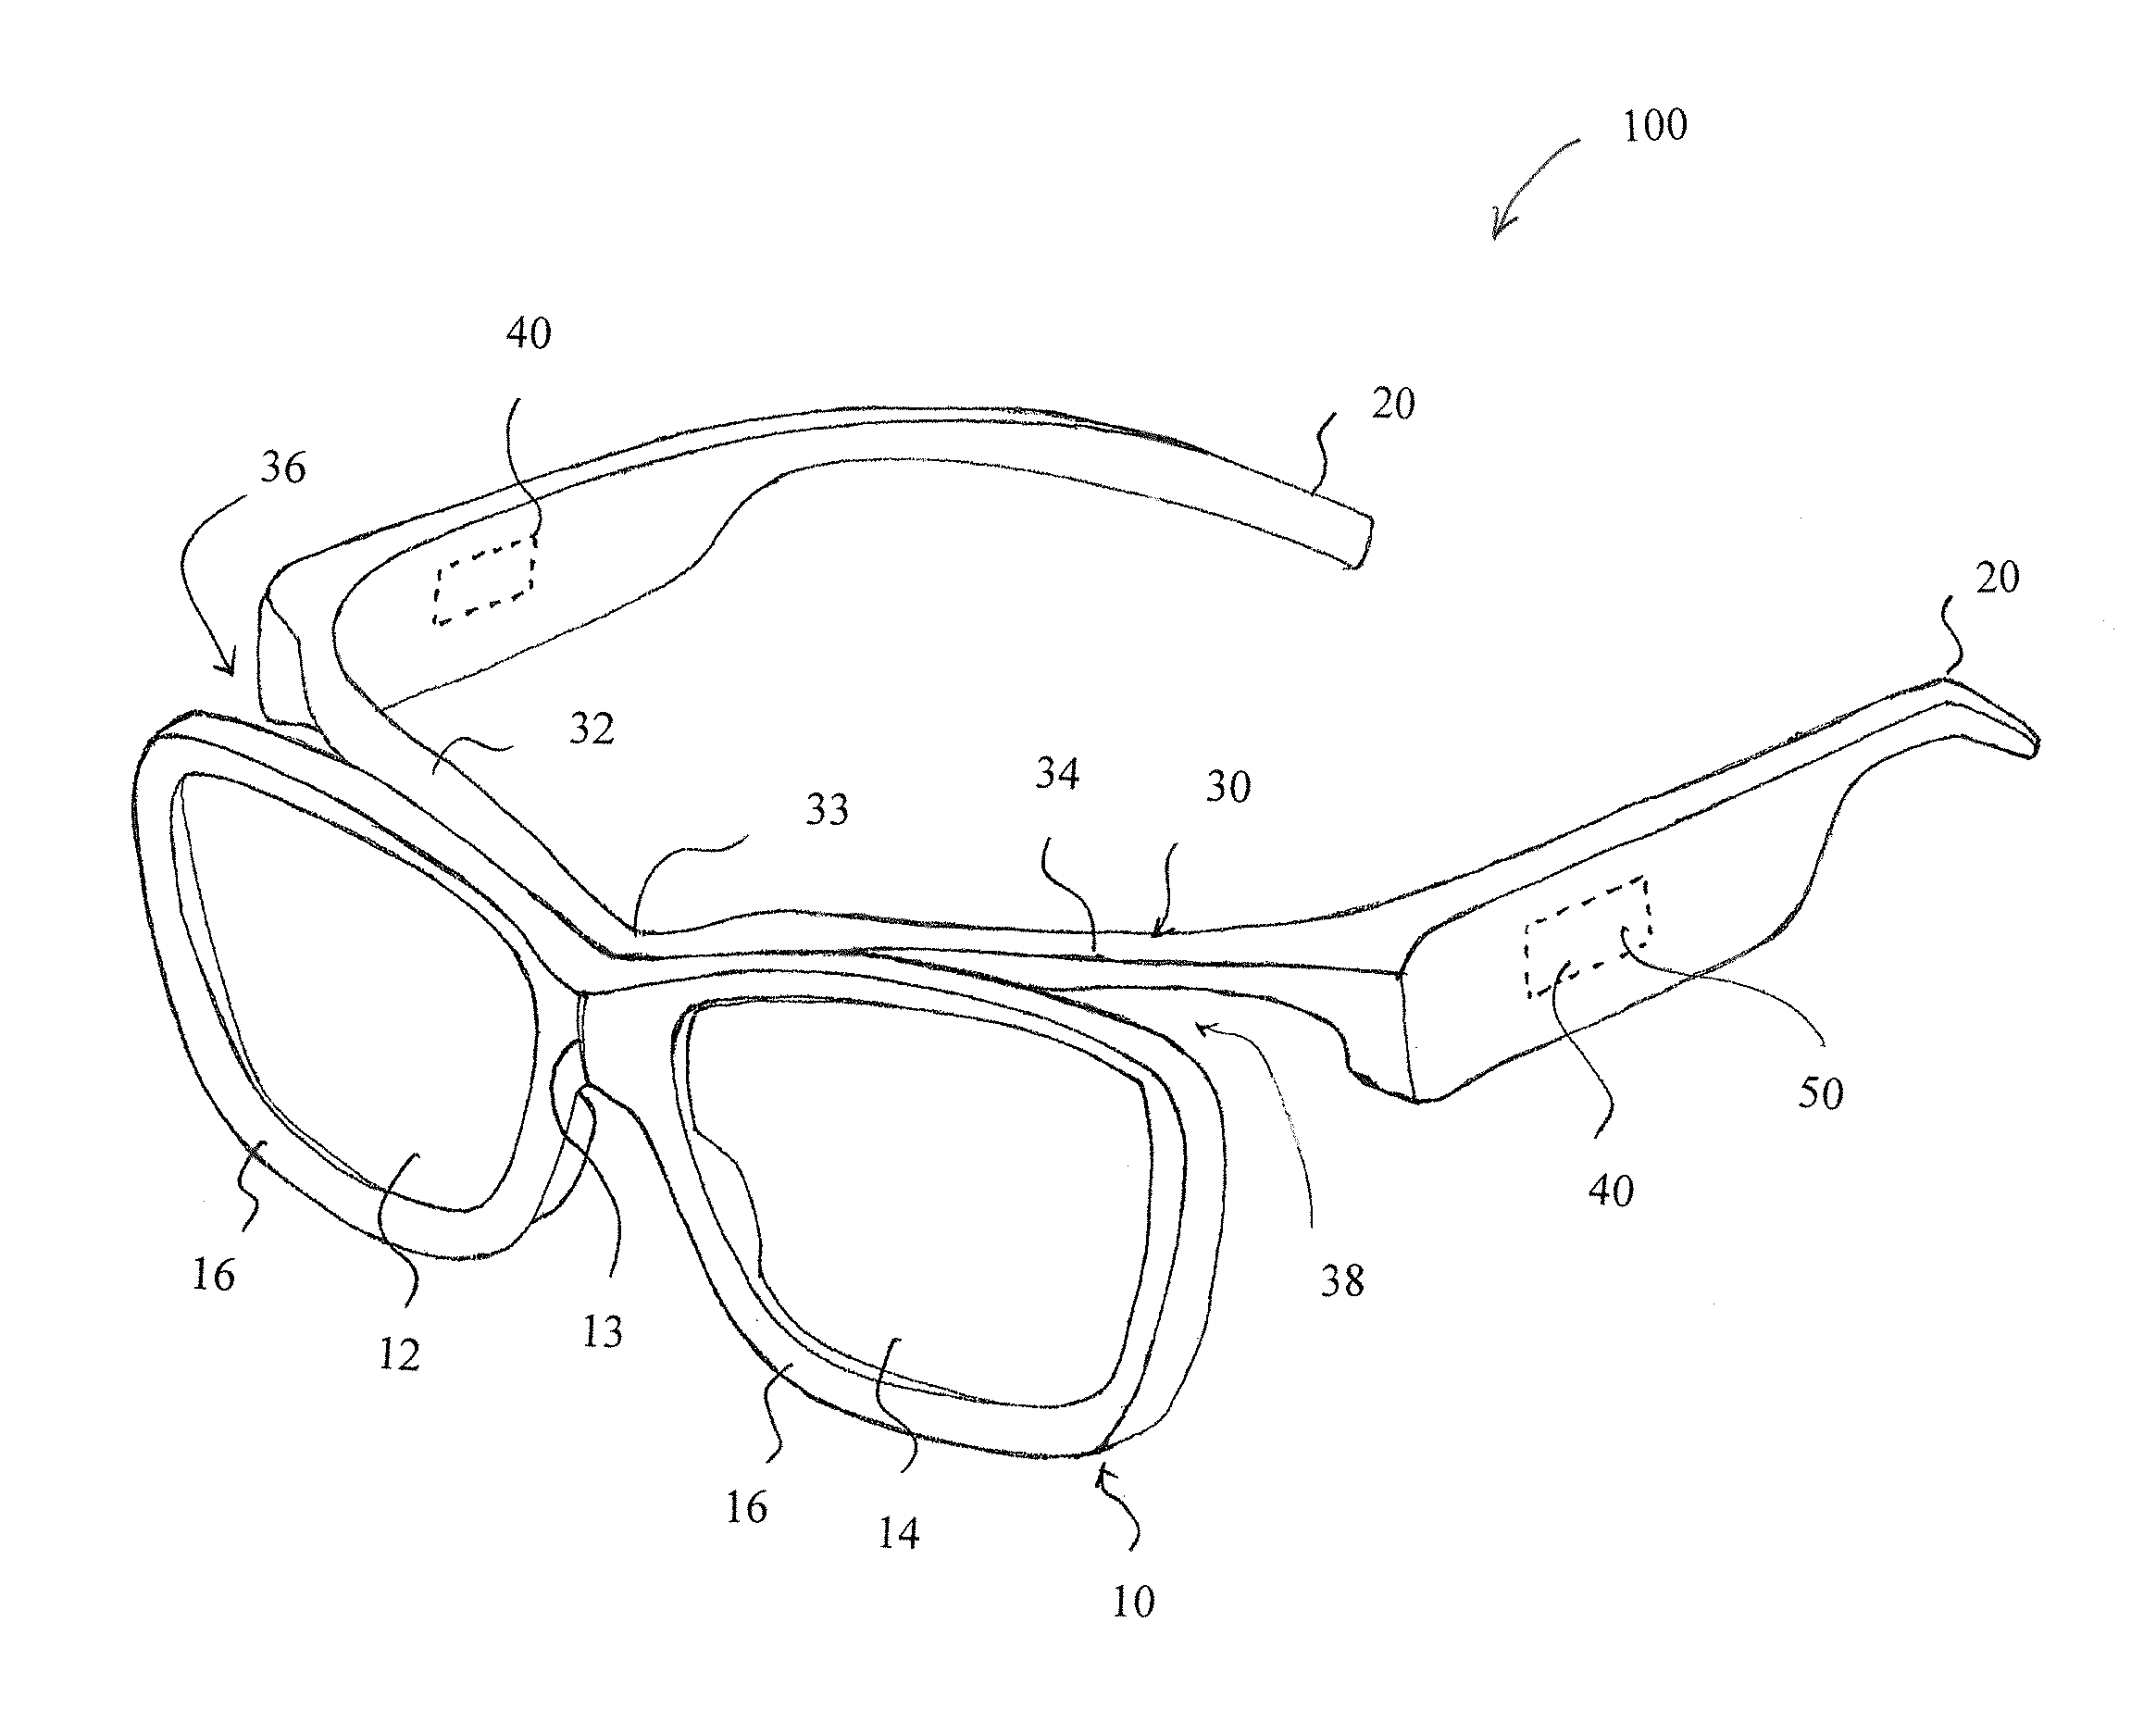 Reusable 3D glasses embedded with RFID and RF-EAS tags for use at 3D movie theatres